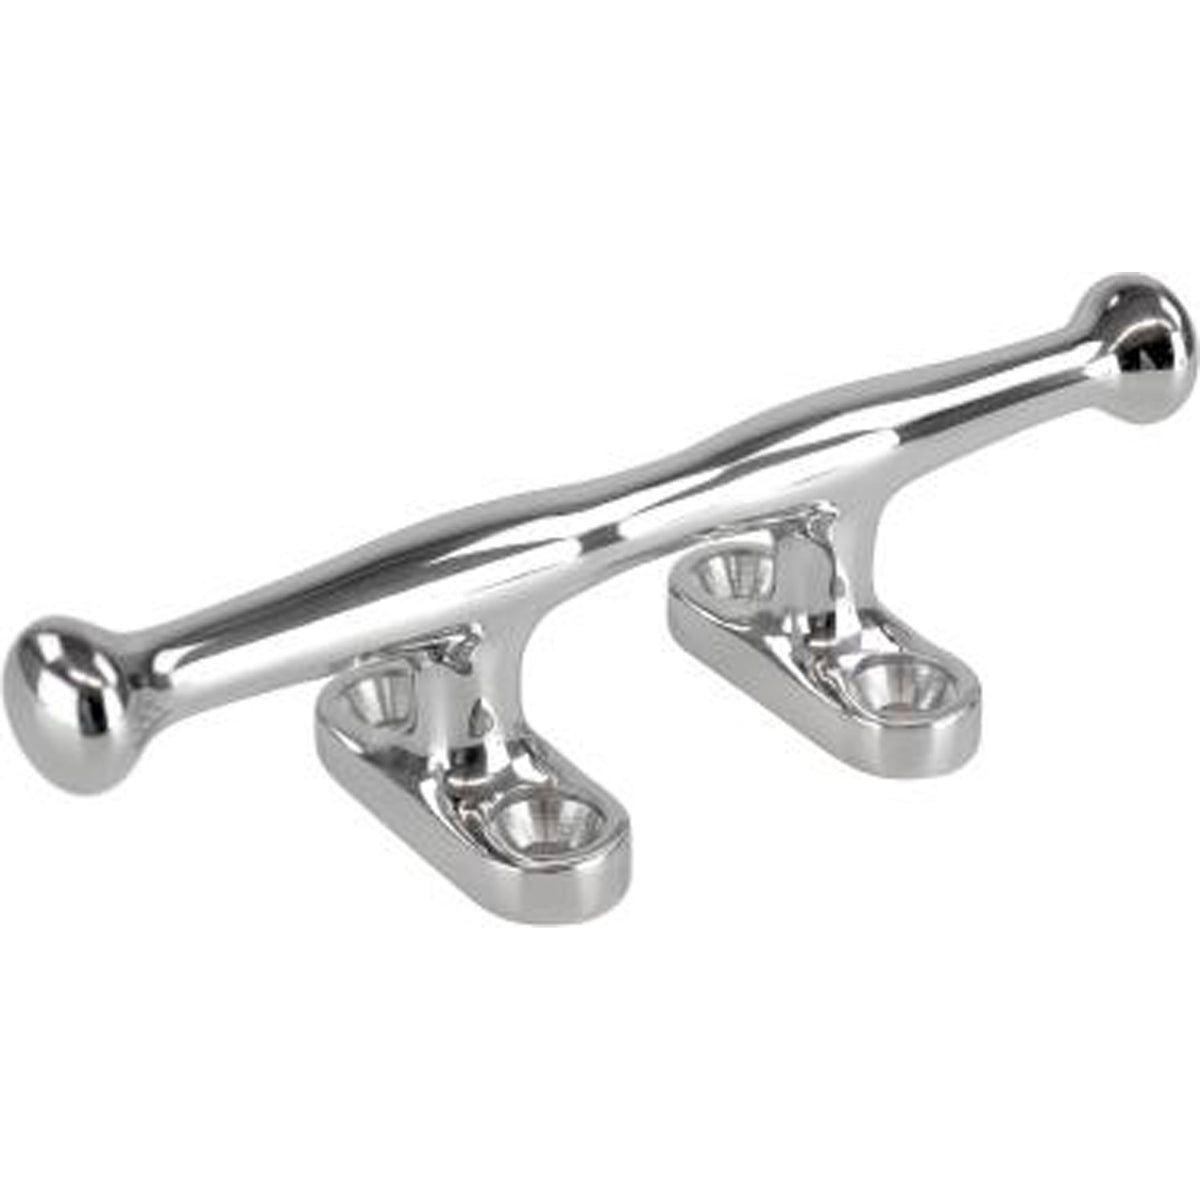 Sea-Dog 041636 Smart Cleat - 6", Stainless Steel